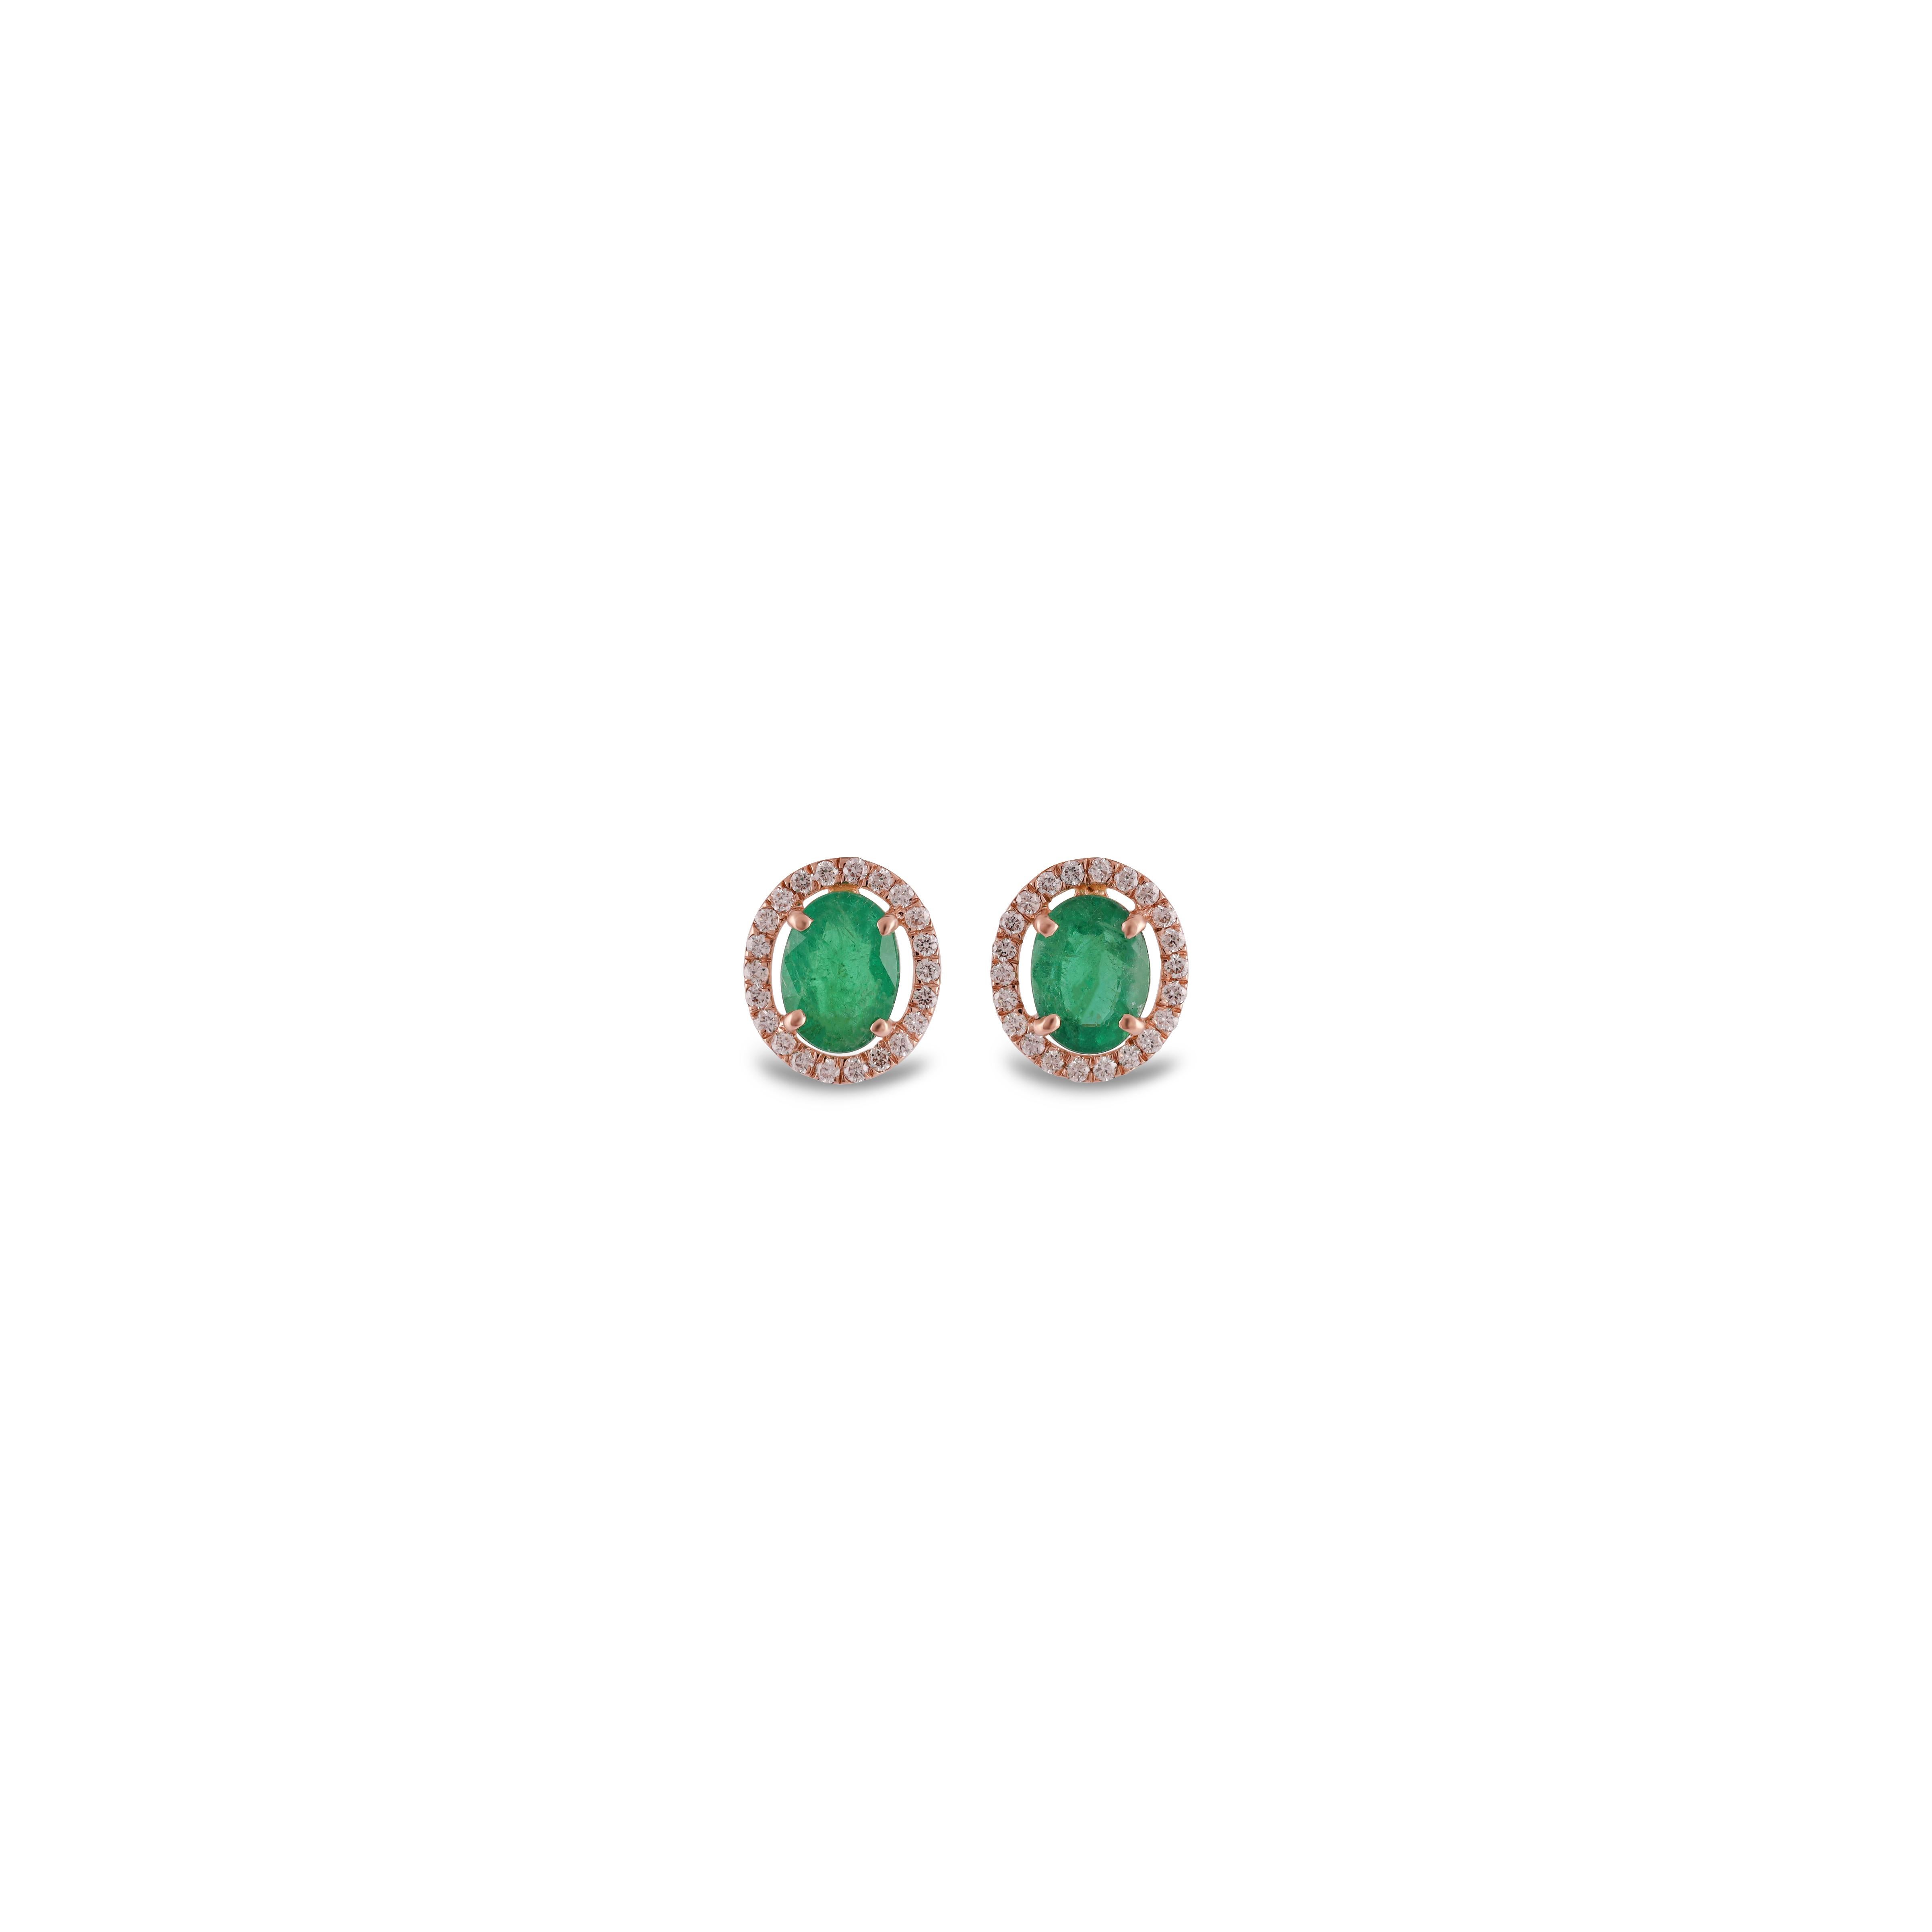 Elegant Emerald  stud earrings that are fun to wear. A classic pair of earrings with a designer touch with its Cluster  setting in 18K Rose gold, giving it a true Fun look.

2.07 Carat Emerald  Stud Earrings in 18 Karat Rose Gold

Emerald  : 2.07